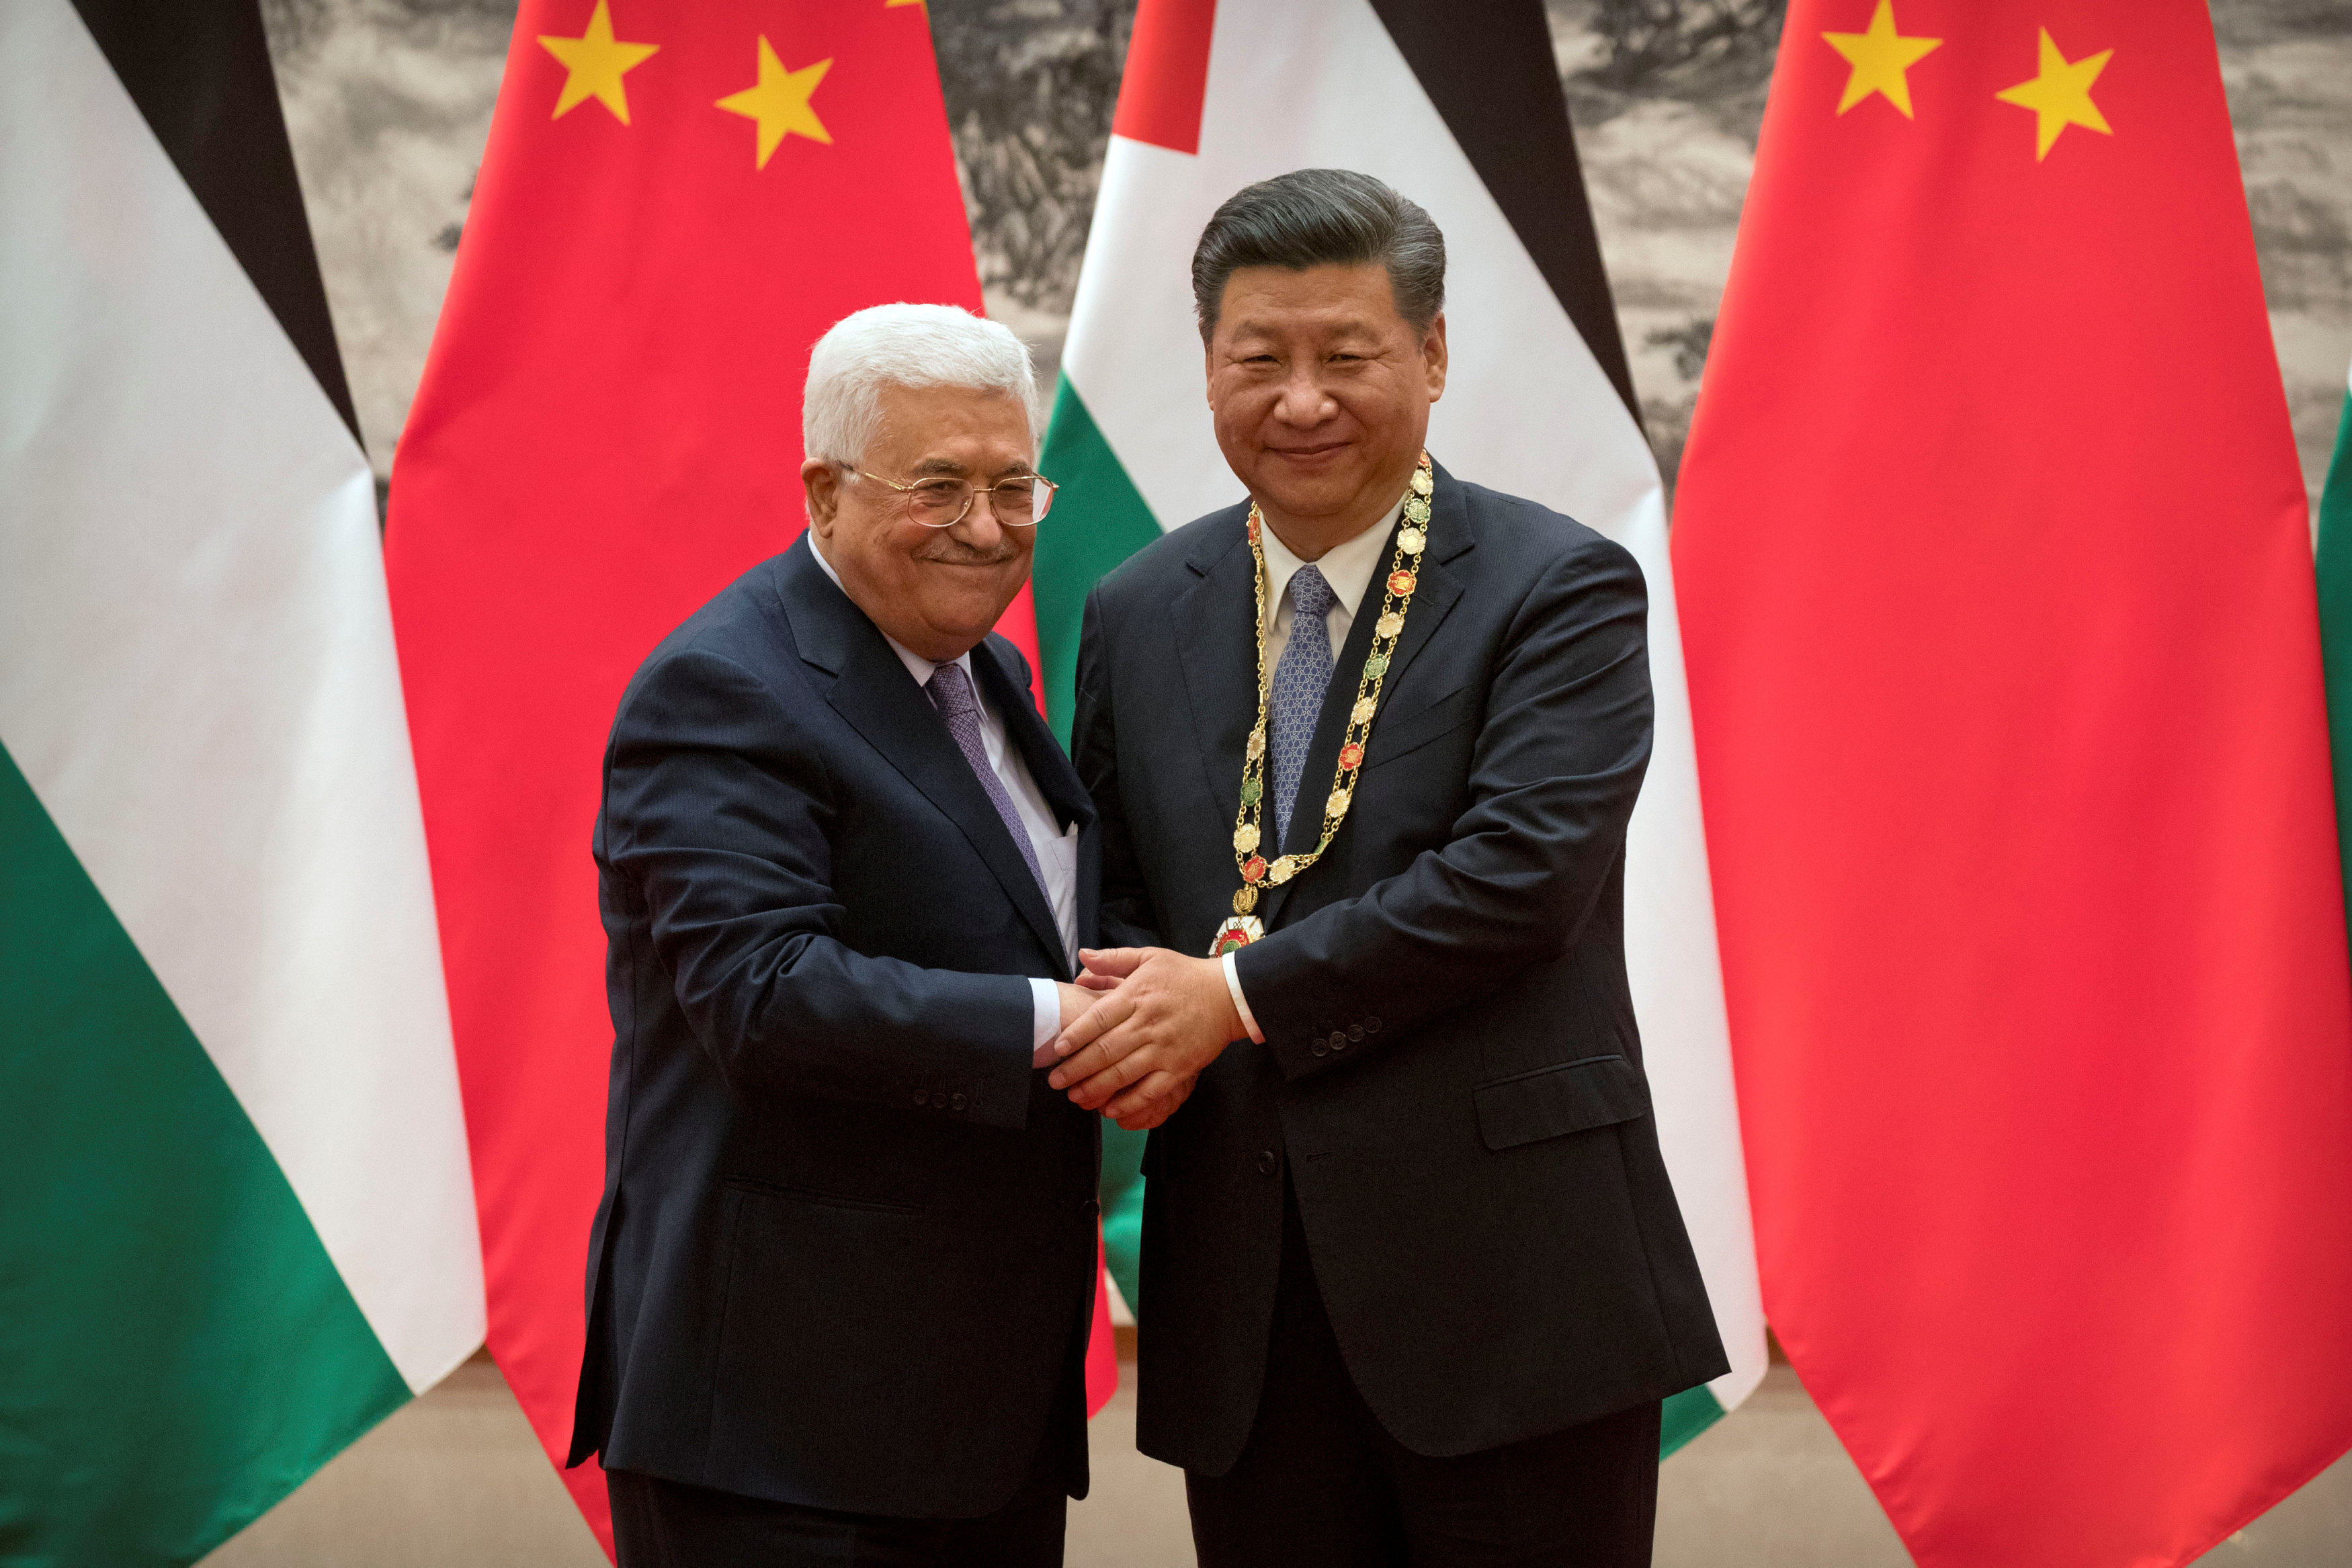 In June, Chinese leader Xi Jinping told the visiting president of the Palestinian Authority, Mahmoud Abbas, that Beijing was willing to help promote peace talks with Israel. Photo: Reuters